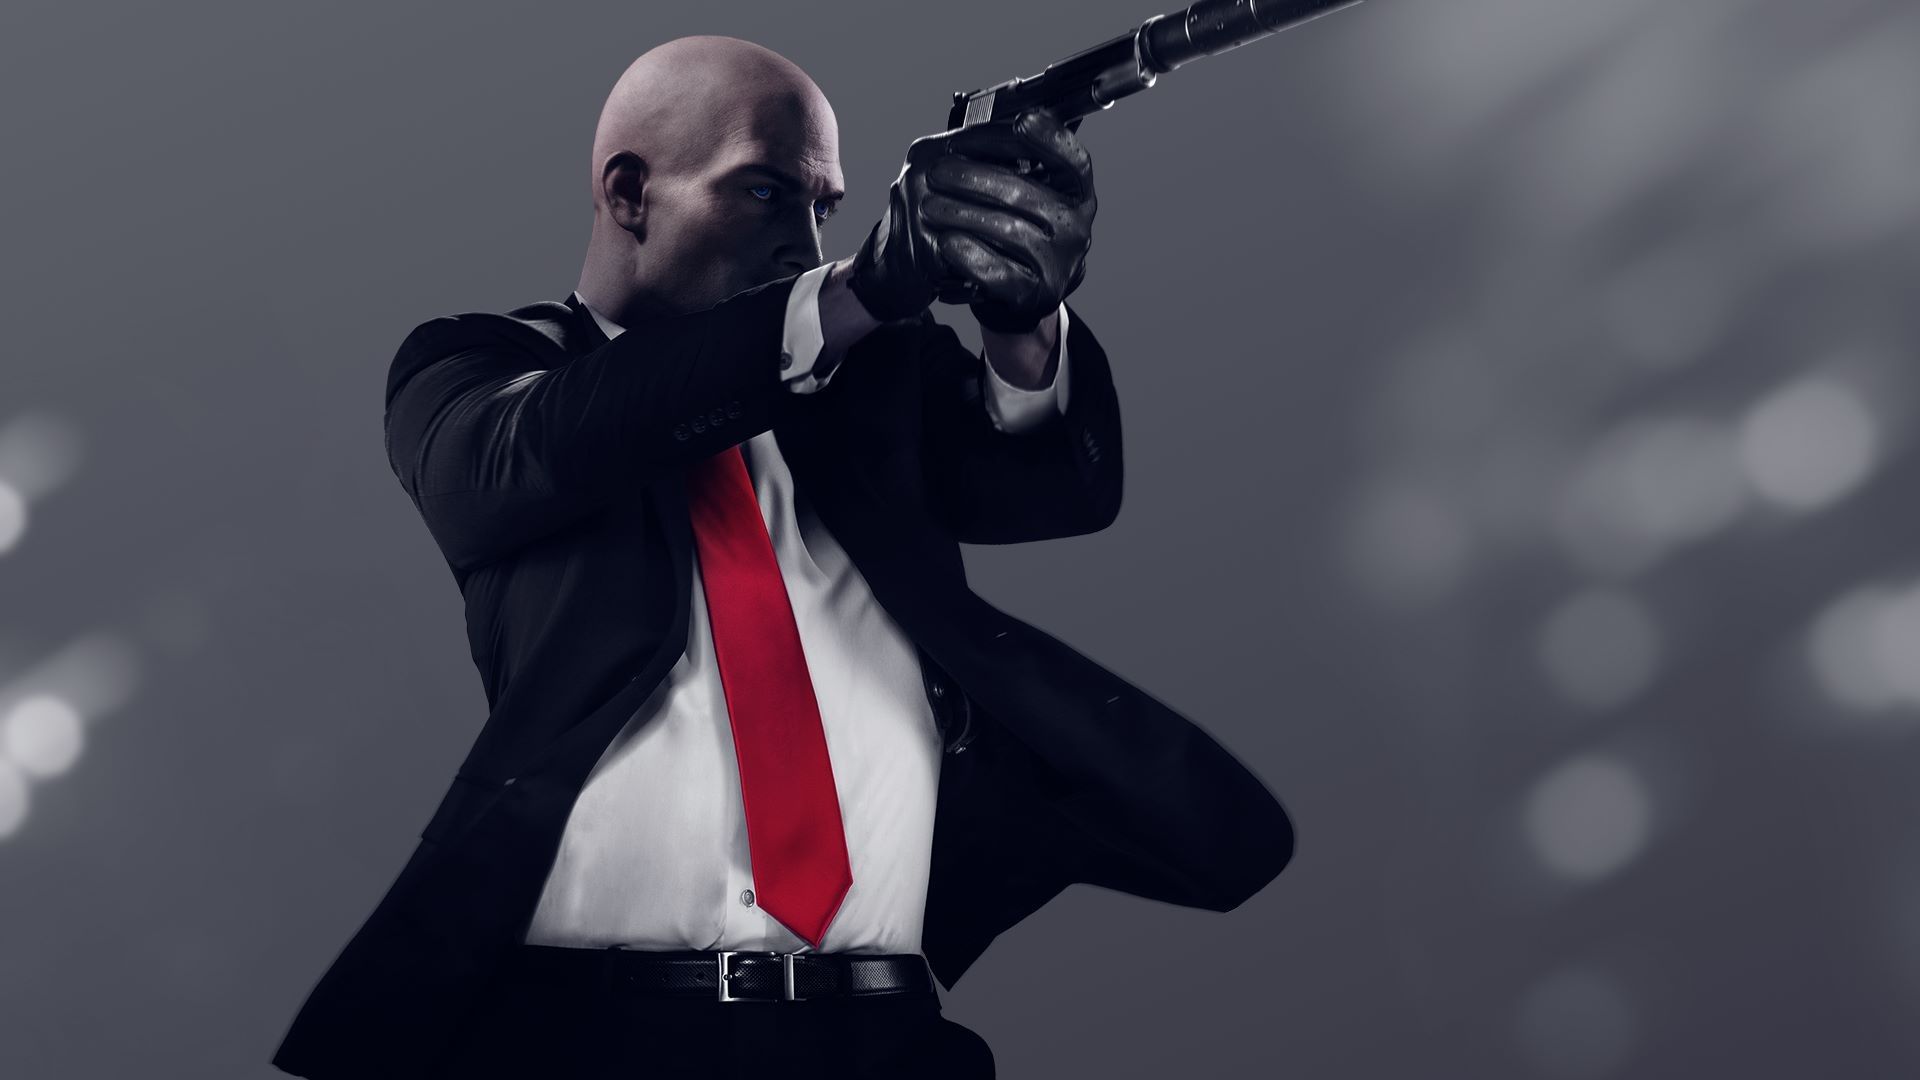 What we want to see in Hitman 3